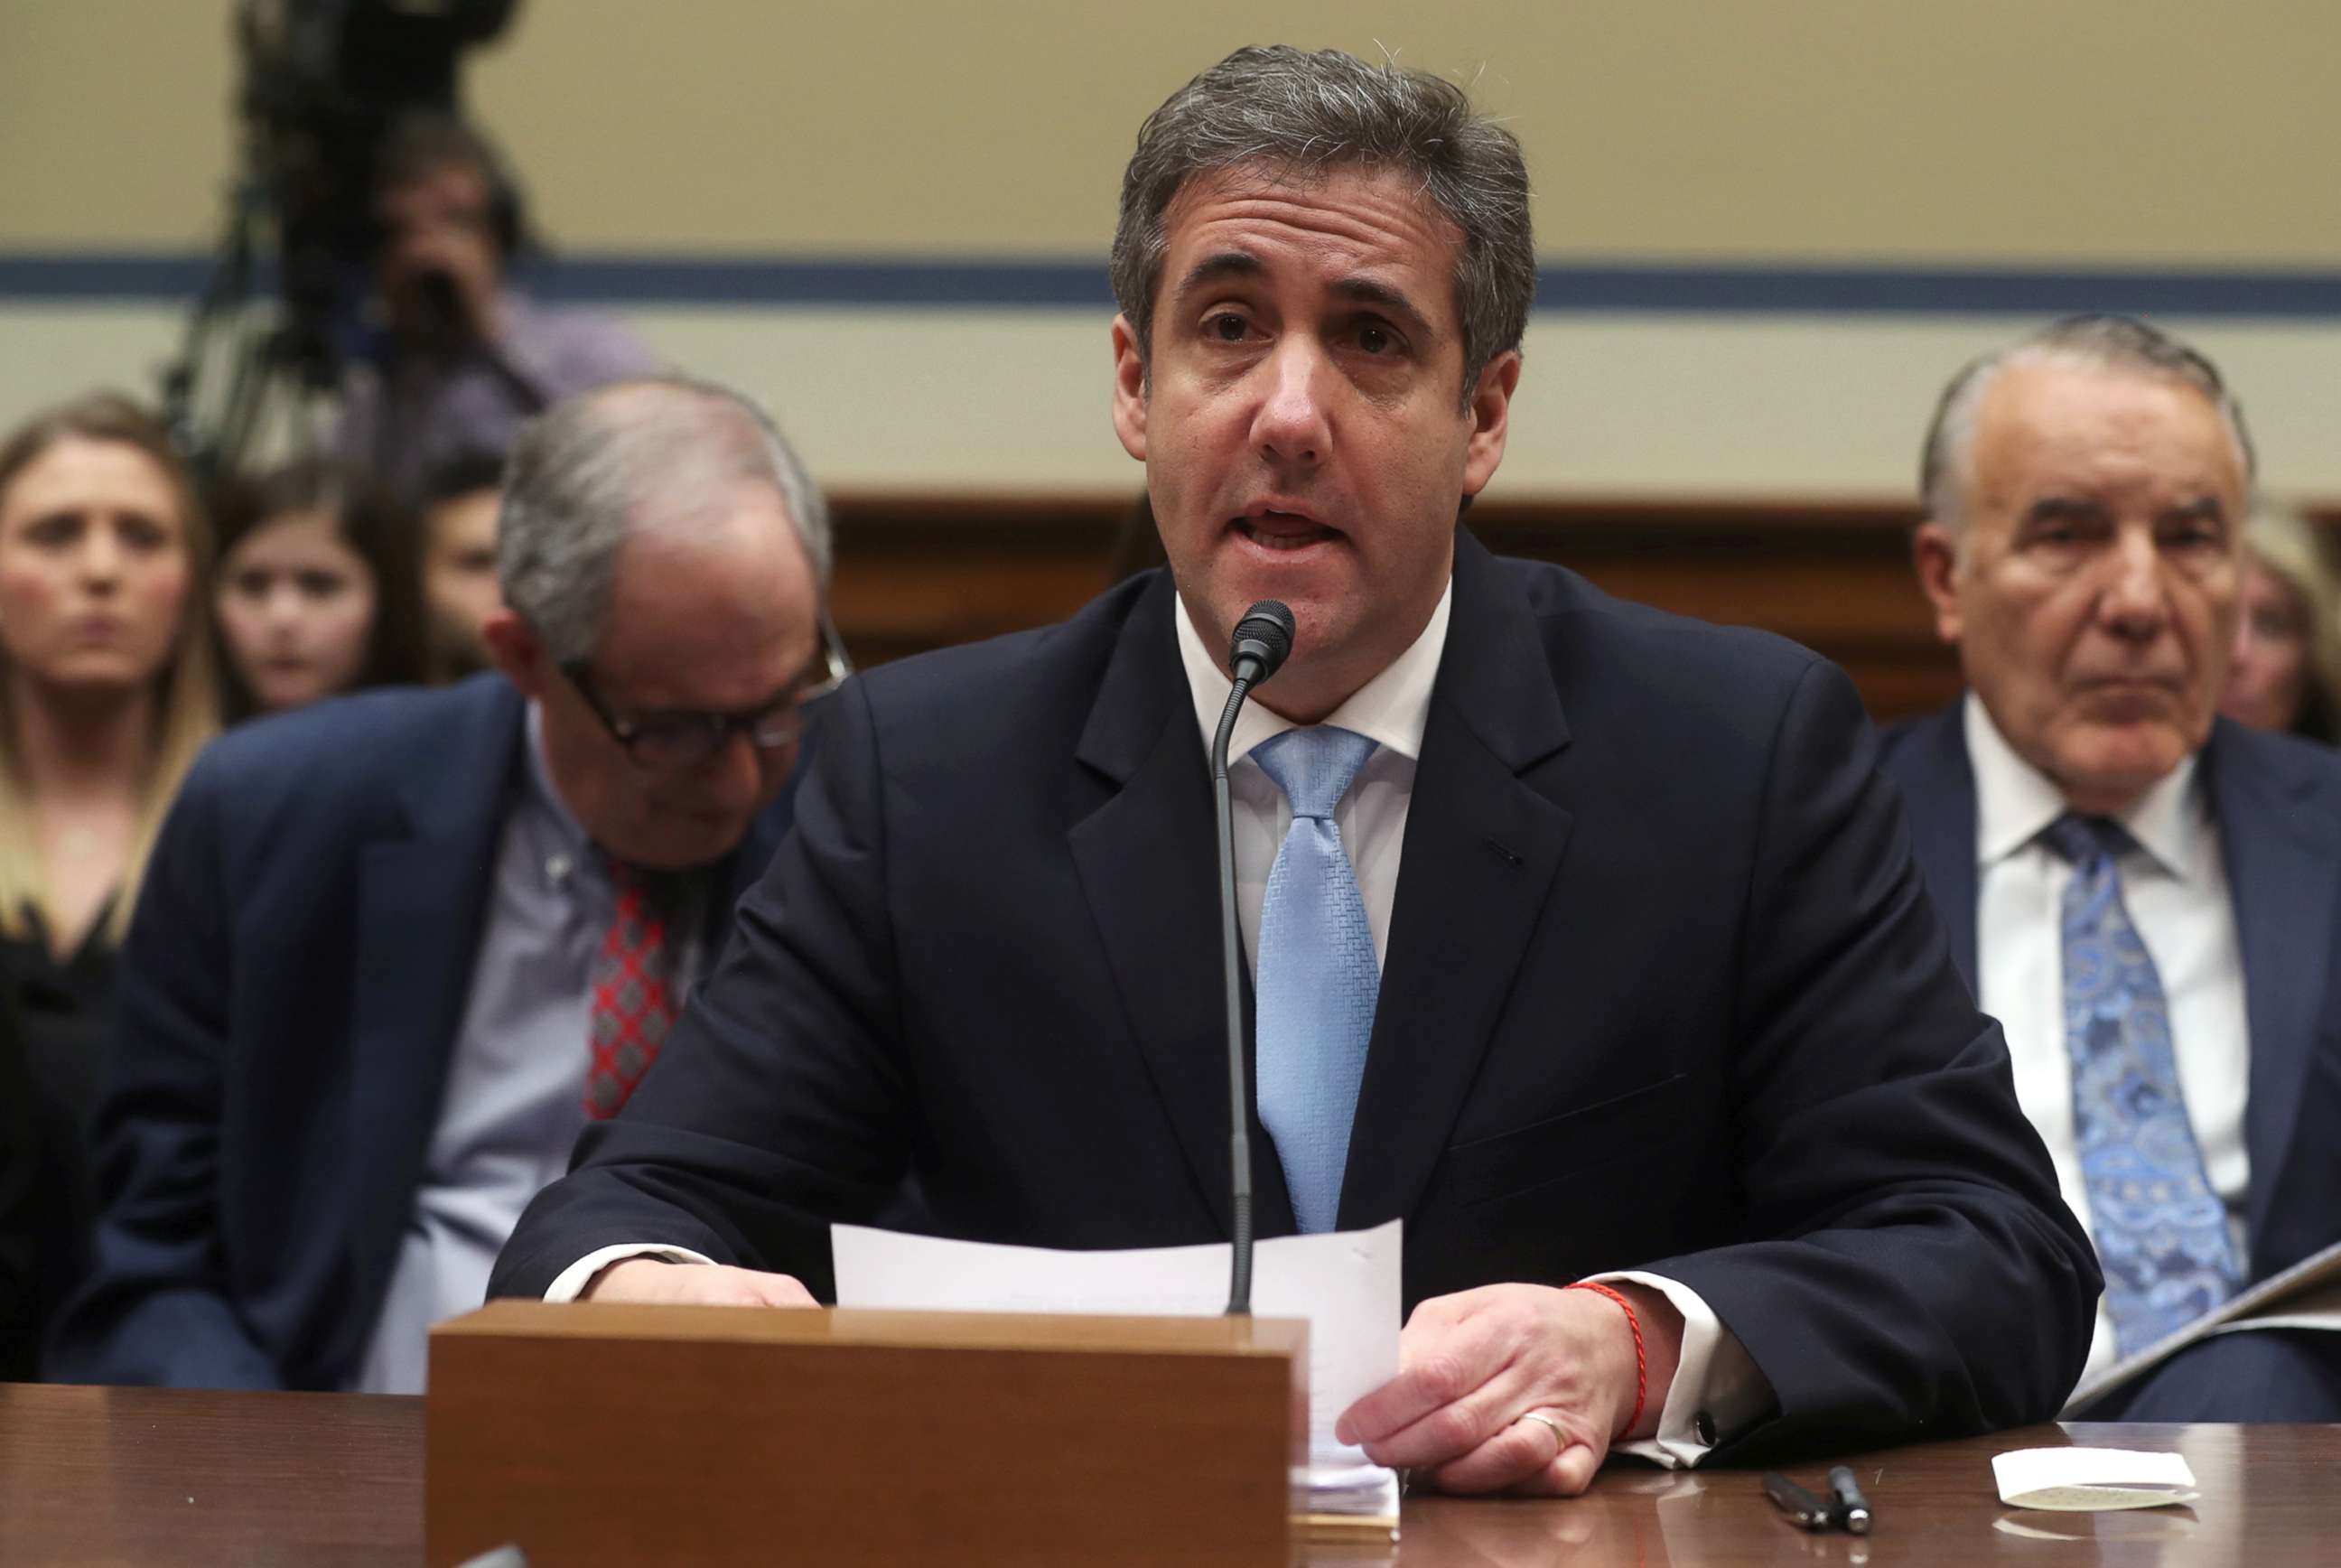 PHOTO: Michael Cohen, the former personal attorney of President Donald Trump, testifies at a House Committee on Oversight and Reform hearing on Capitol Hill in Washington, D.C., Feb. 27, 2019.